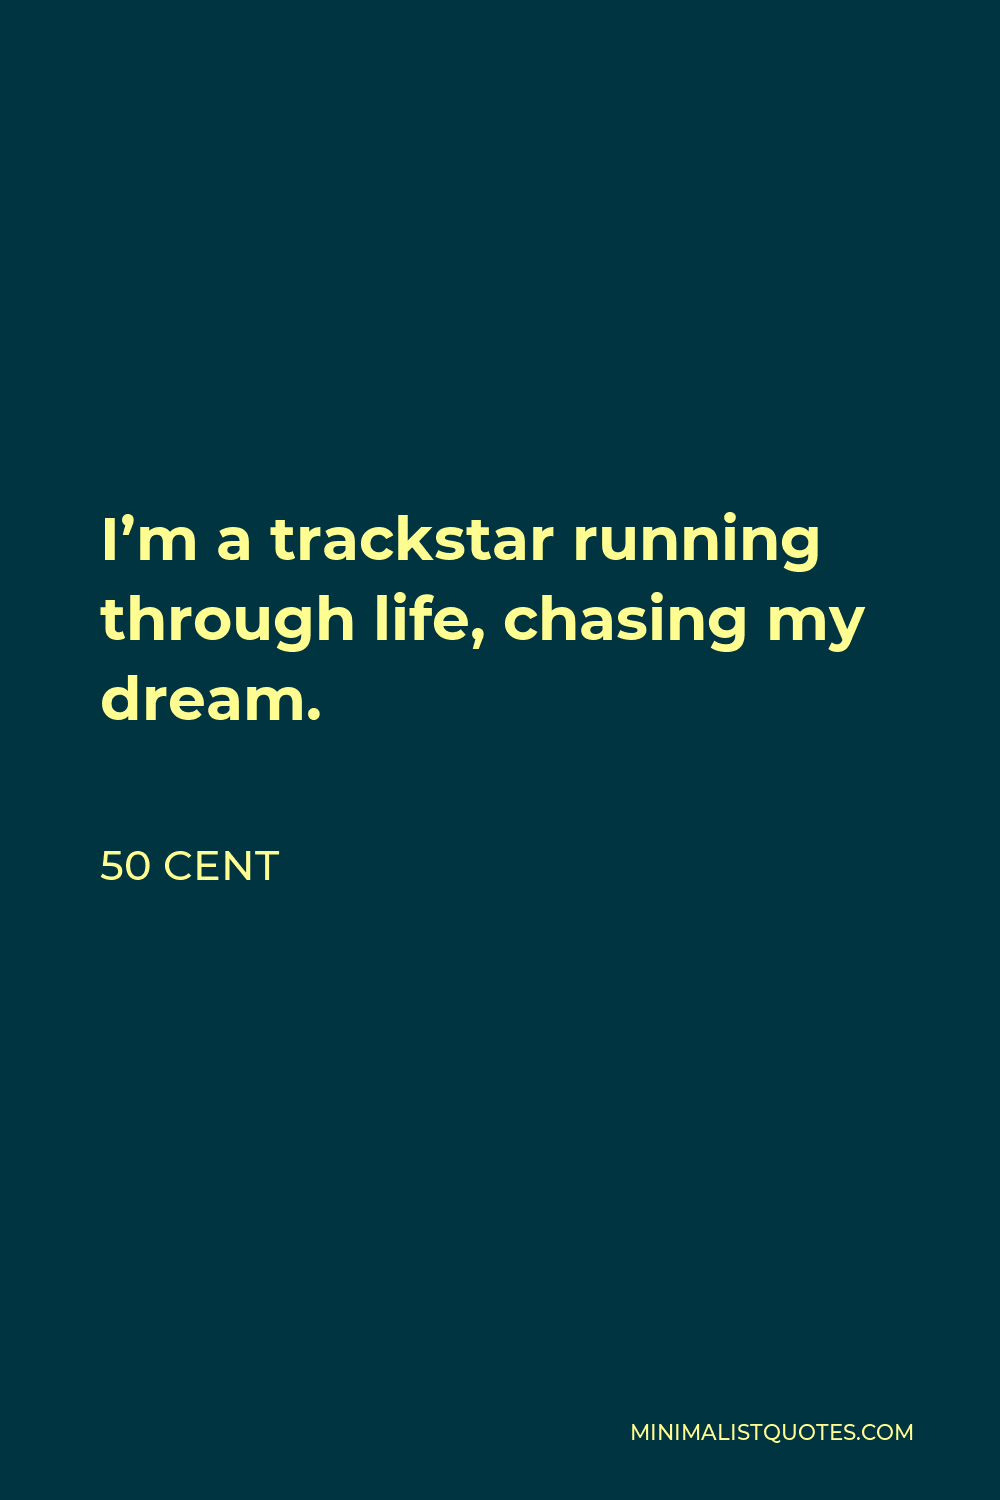 50 Cent Quote - I’m a trackstar running through life, chasing my dream.